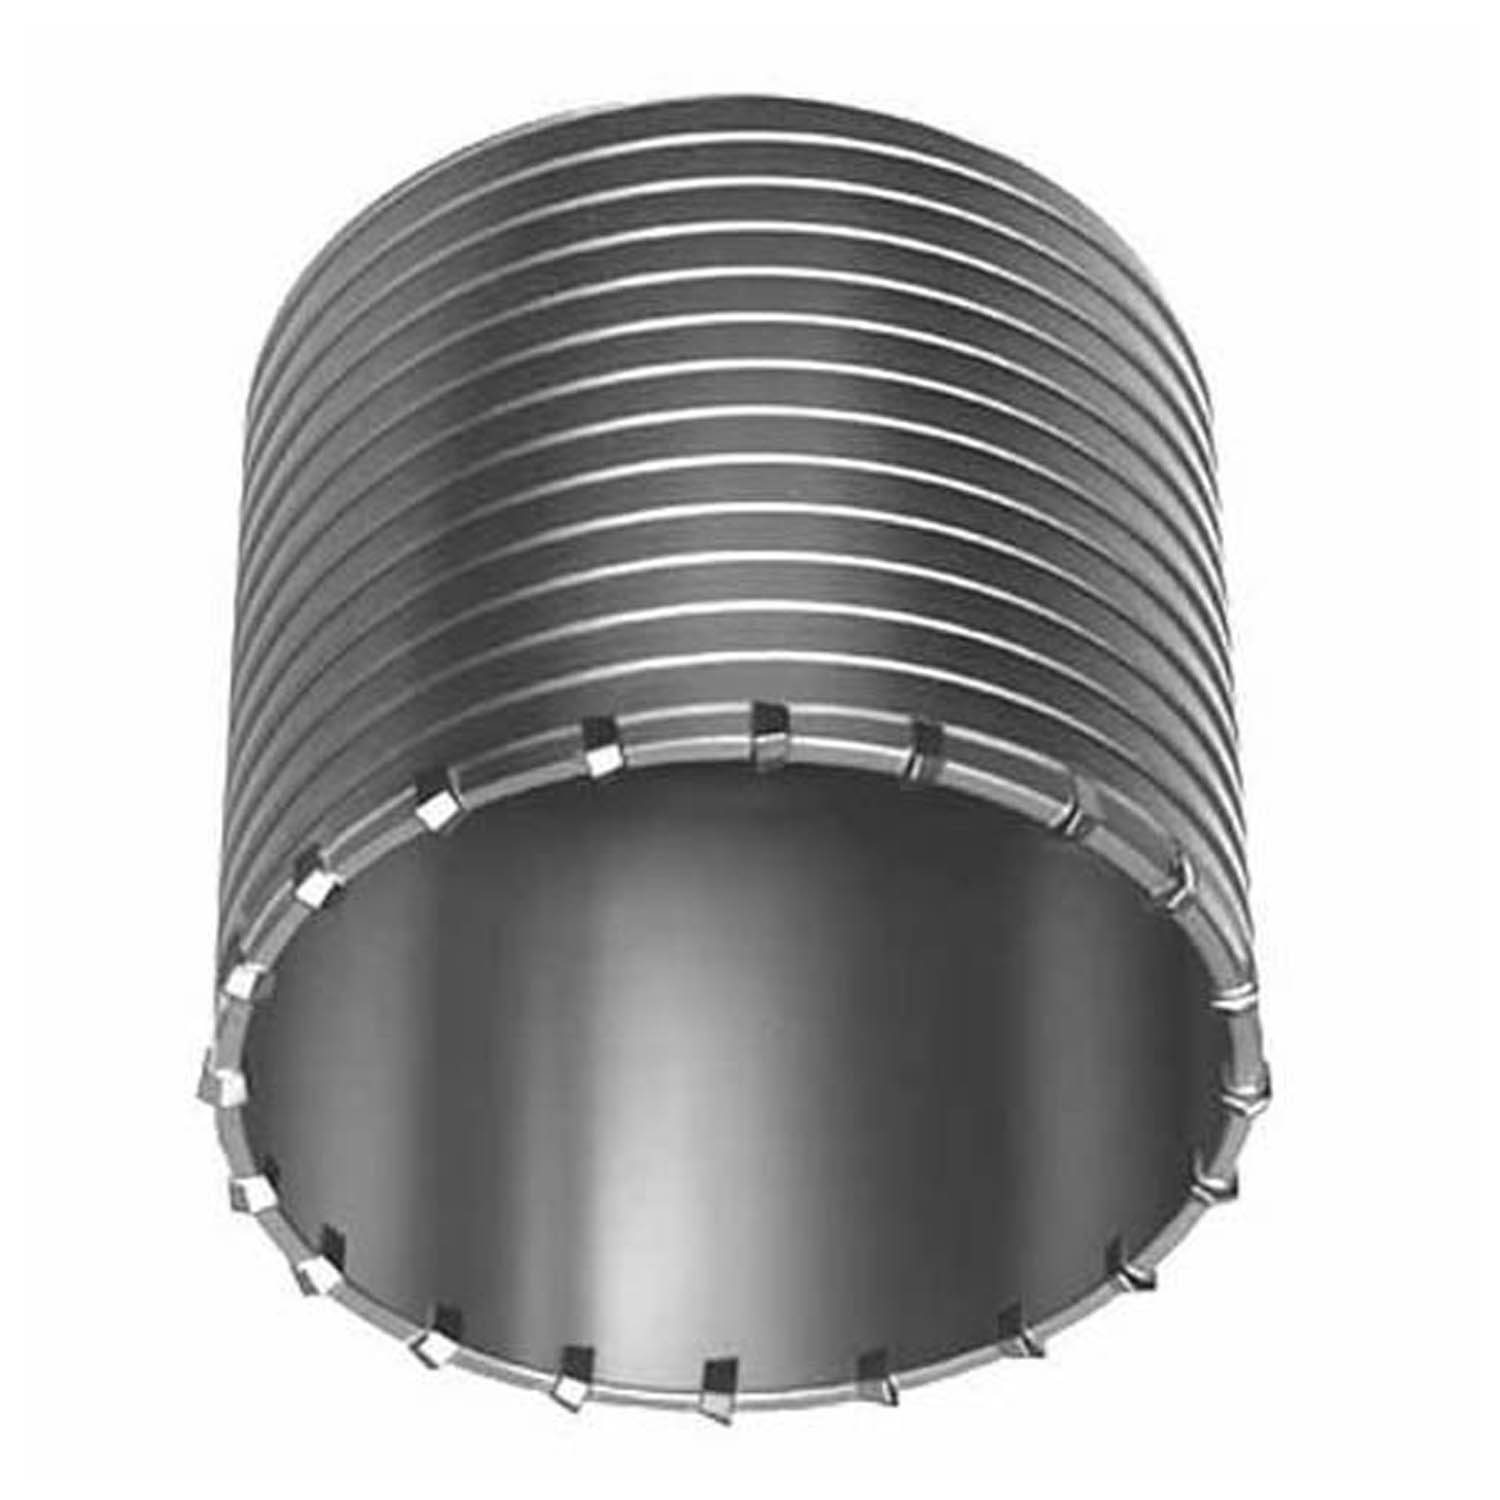 SDS-Max and Spline Thick Wall Carbide Tipped Core Bit 1-1/2 in.